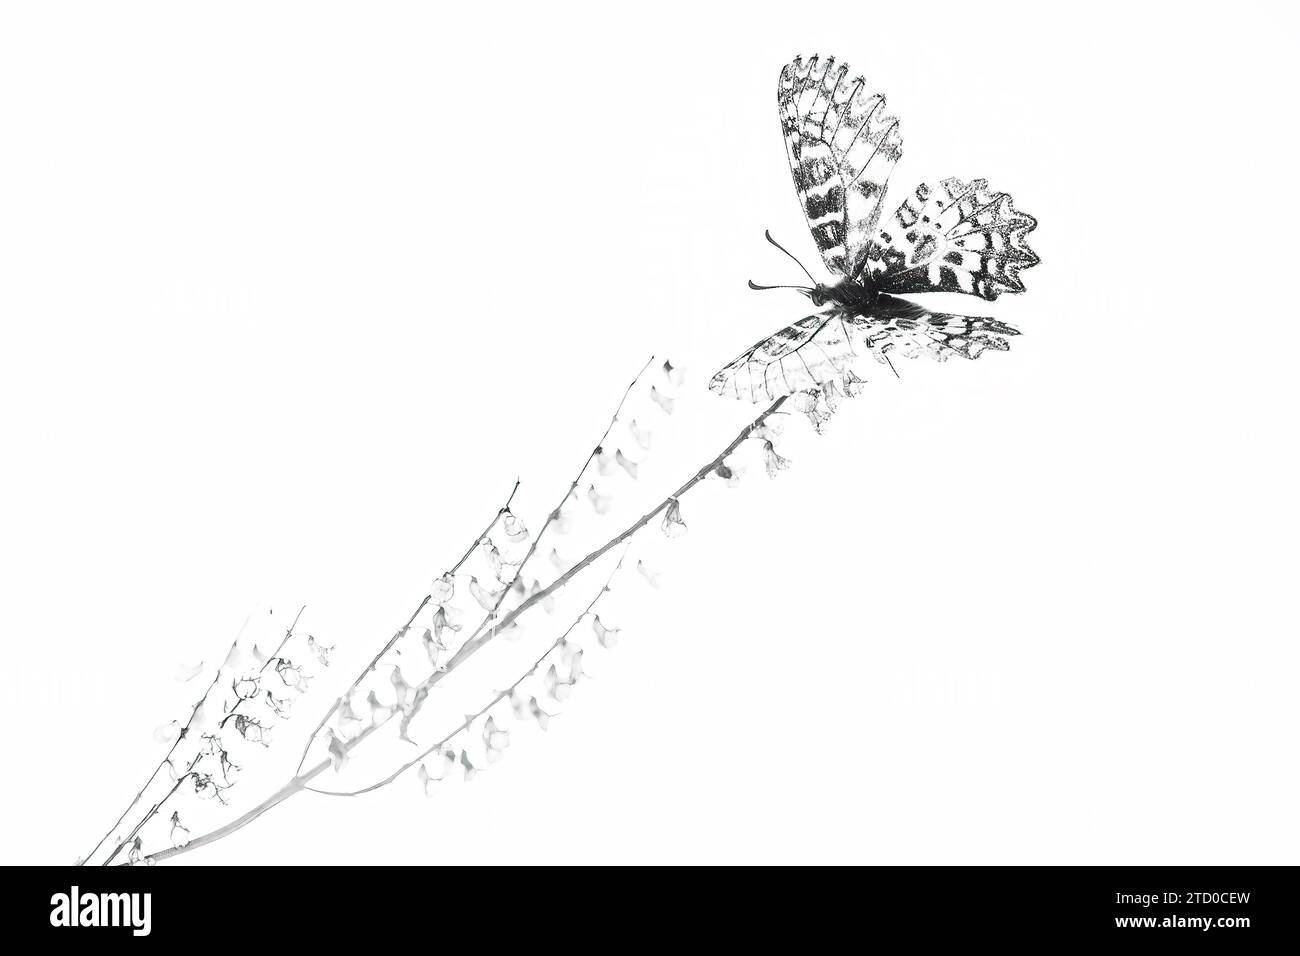 A high-contrast black and white image capturing a butterfly resting on a slender plant stem, evoking a sense of serenity and simplicity. Stock Photo